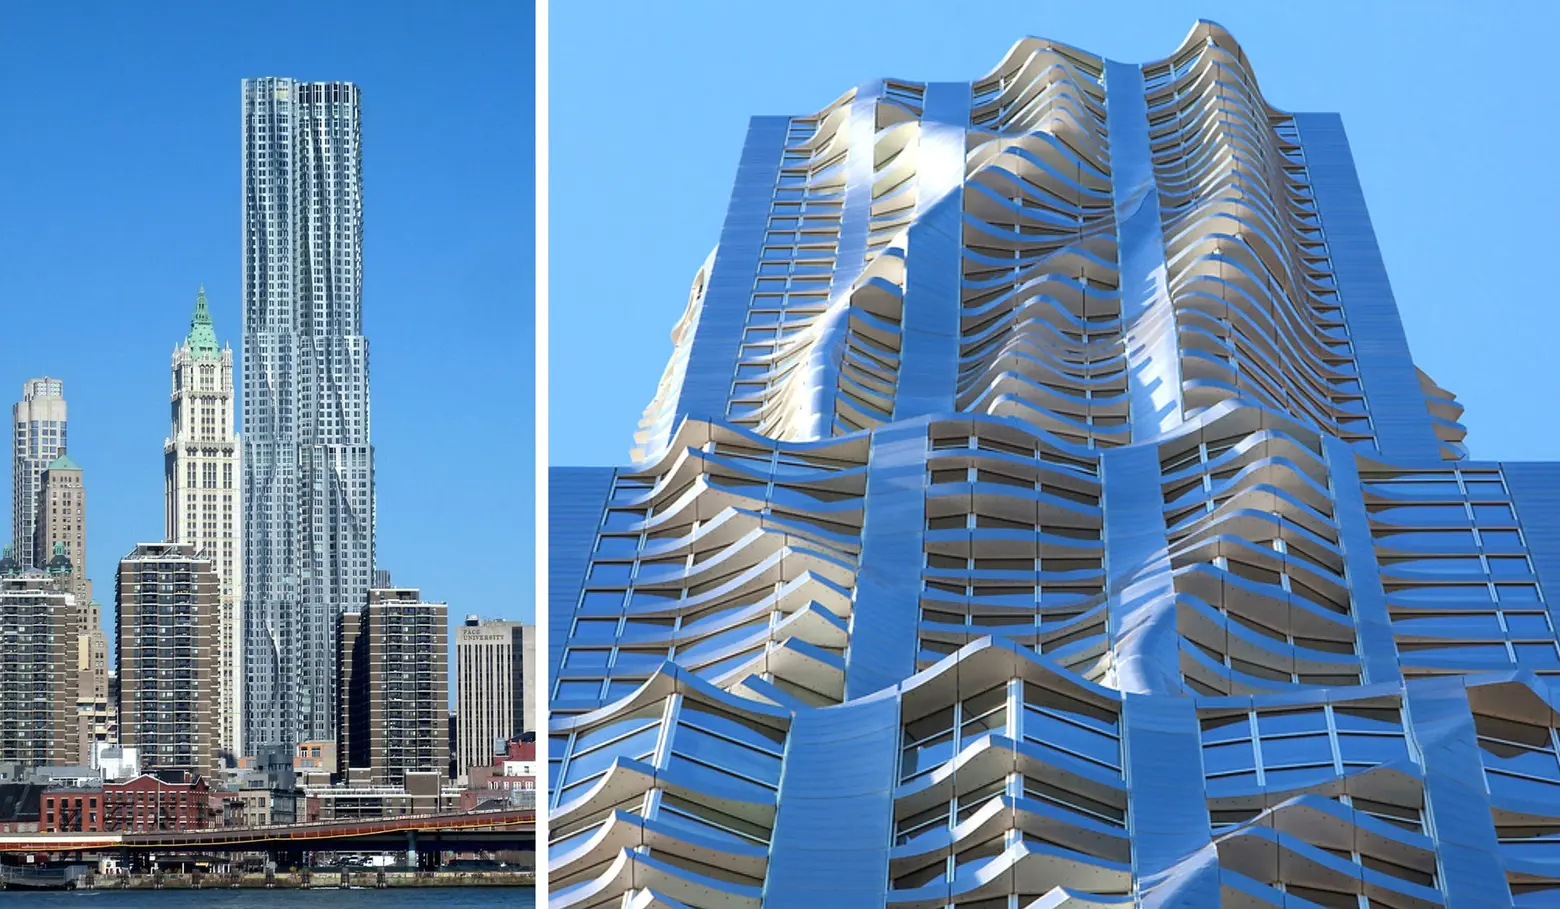 8 spruce street, New York by Gehry, Frank Gehry, Beekman tower